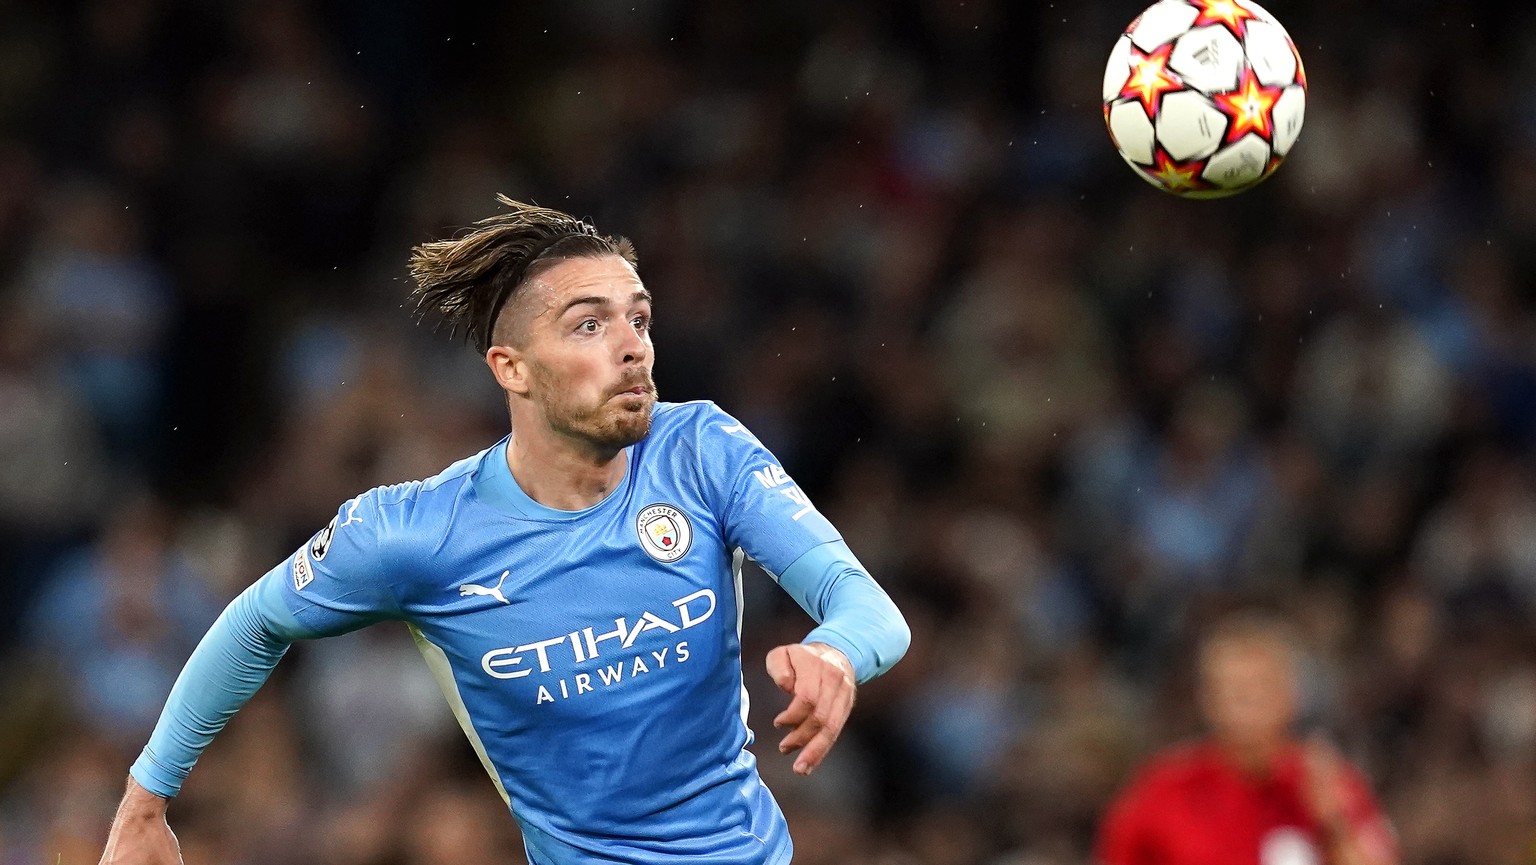 epa09470696 Manchester City's Jack Grealish in action during the UEFA Champions League group A soccer match between Manchester City and RB Leipzig in Manchester, Britain, 15 September 2021. EPA/Andrew ...